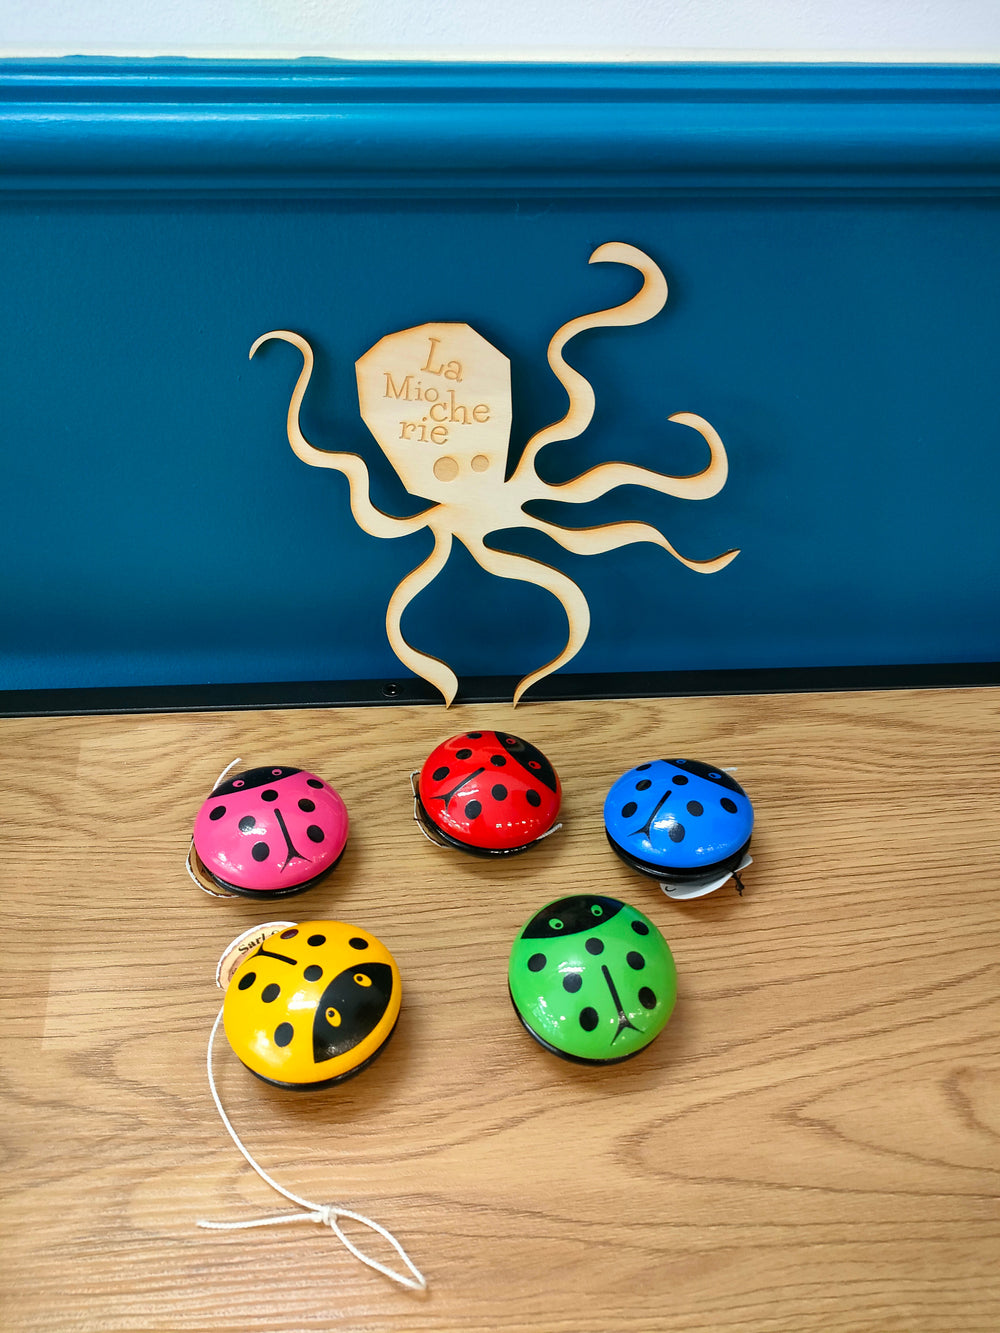 The Ladybug or colorful Yoyo - Made in France (Jura)